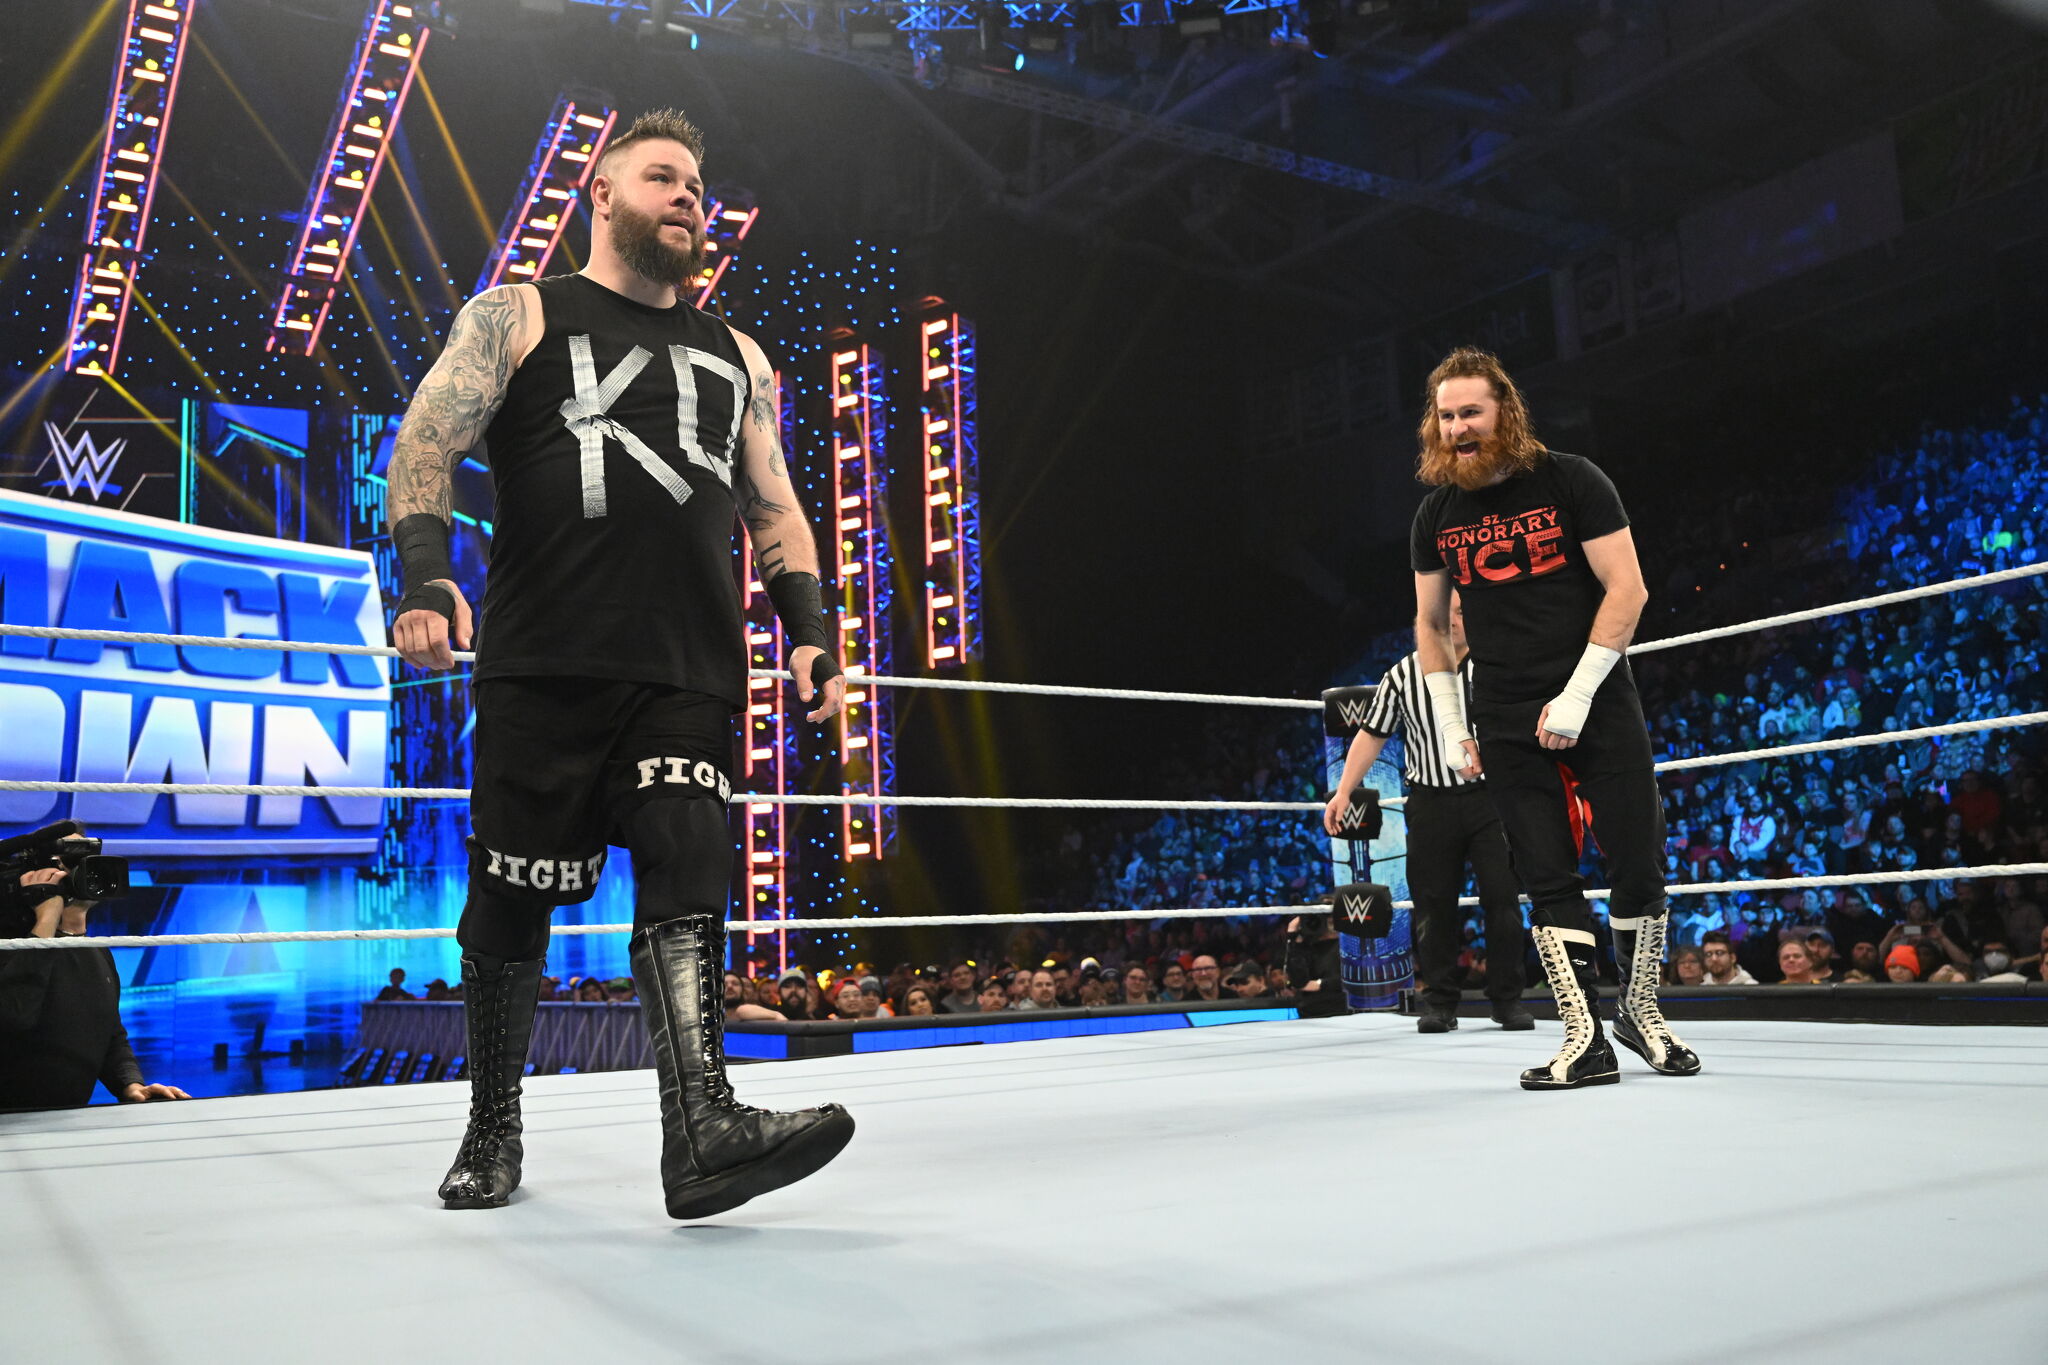 WWE's Kevin Owens talks about Sami Zayn, Roman Reigns and Royal Rumble